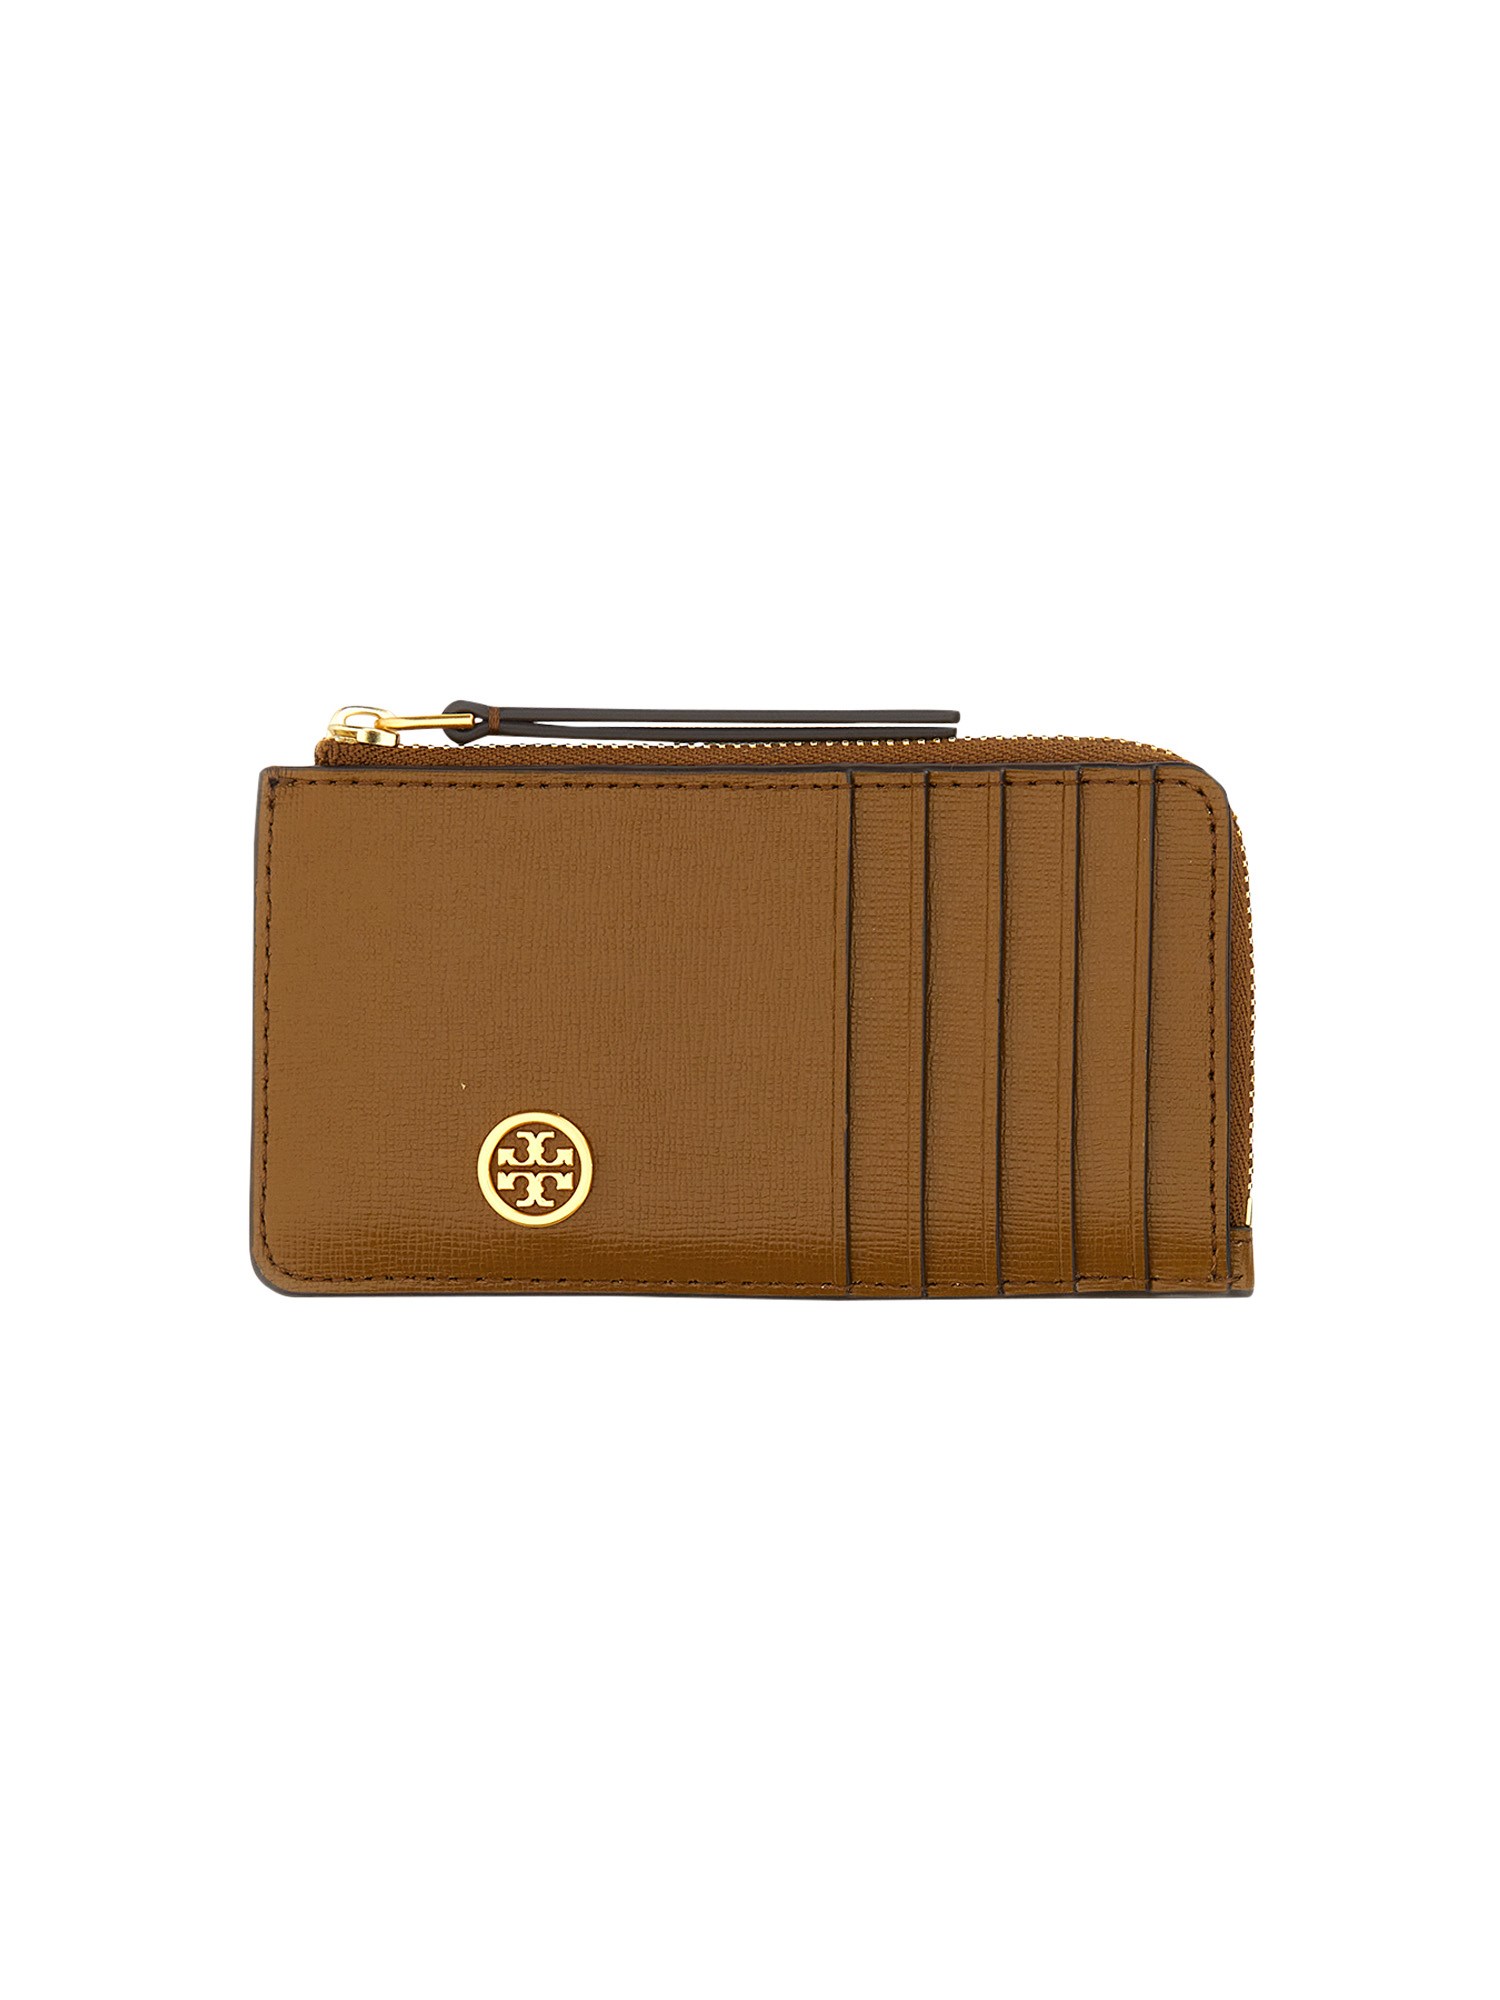 TORY BURCH CARD HOLDER WITH LOGO